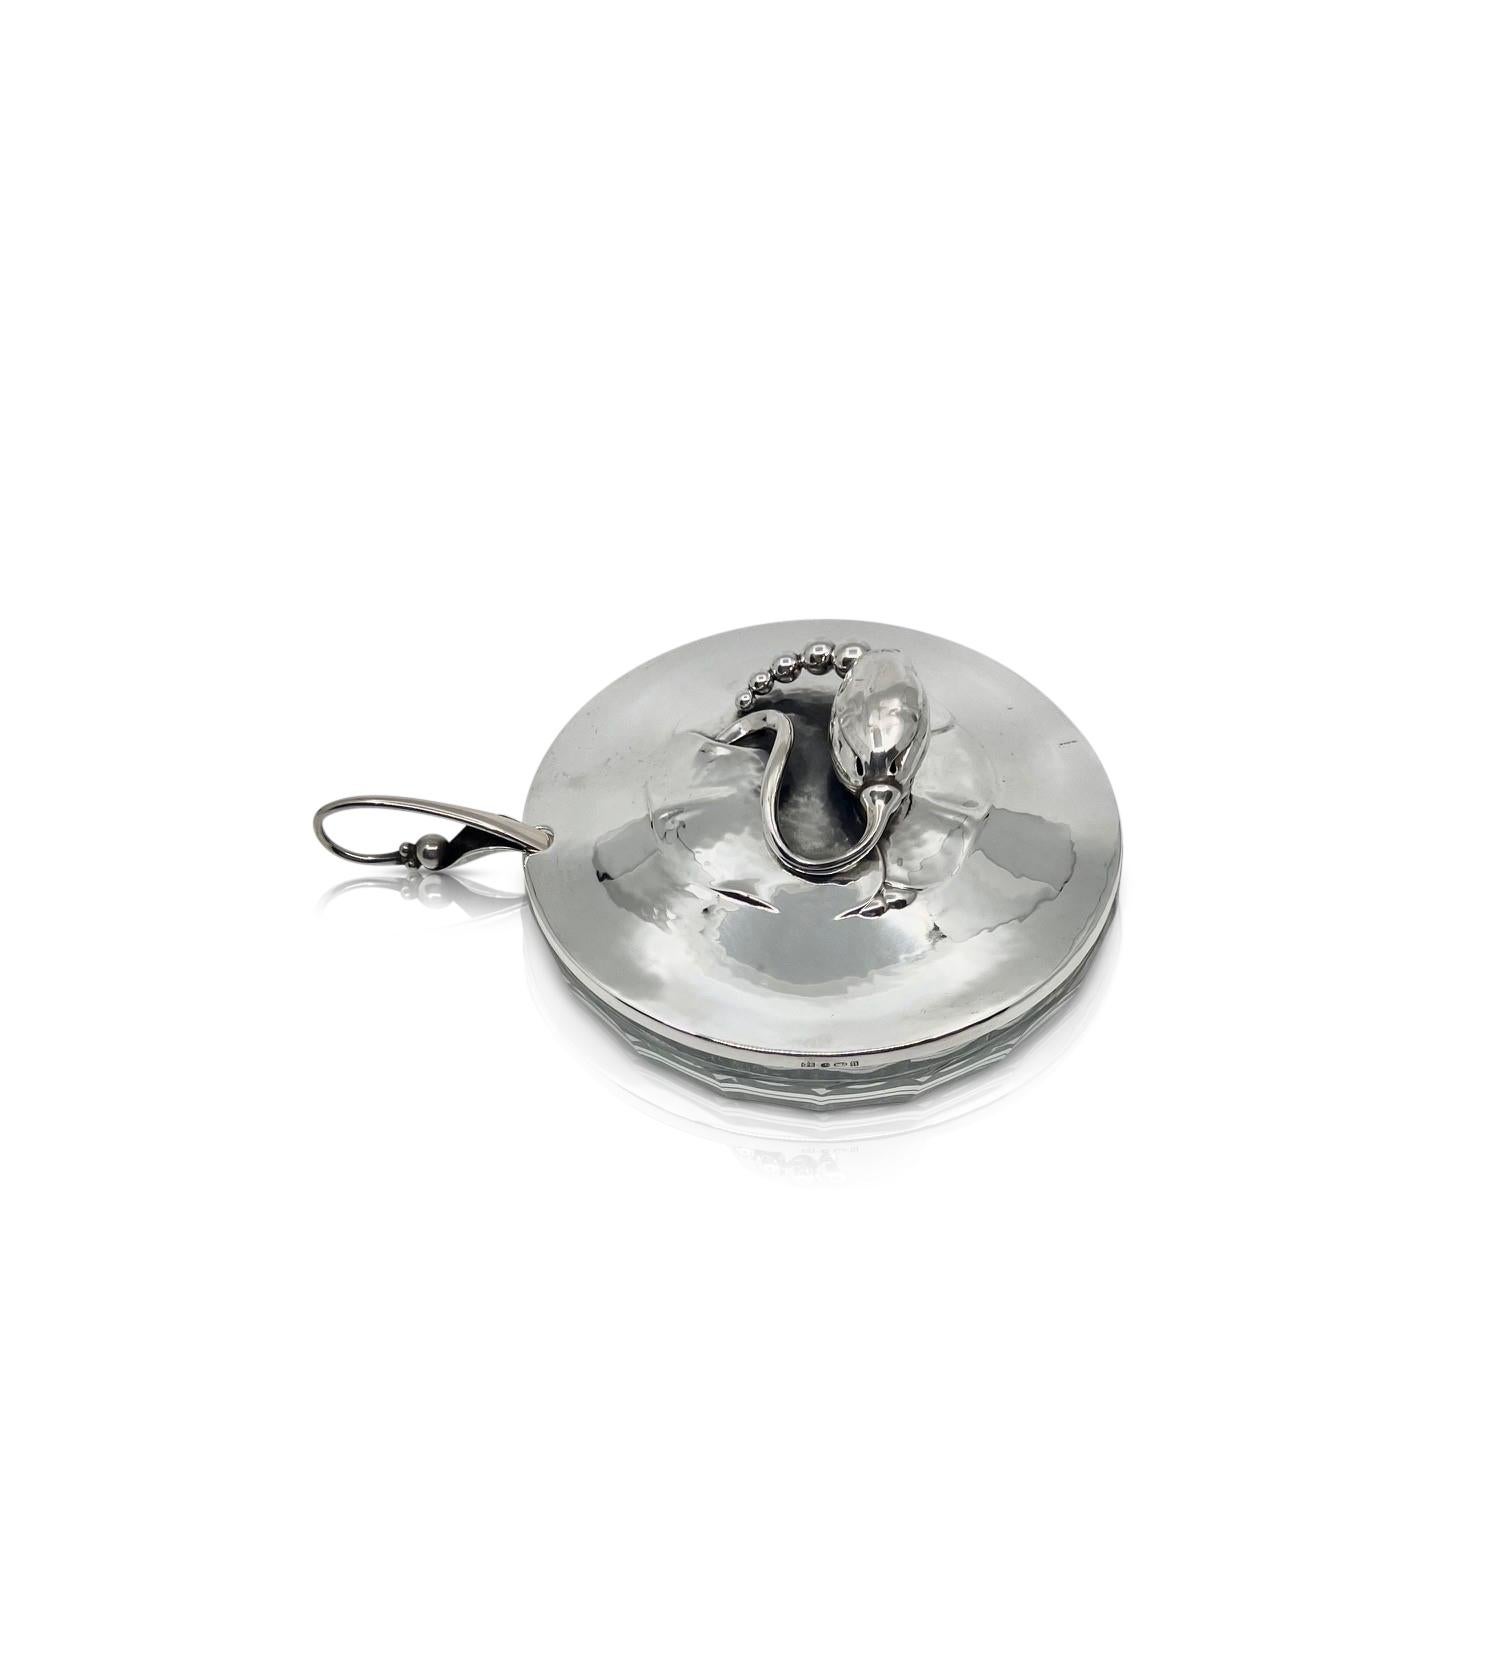 A Georg Jensen Blossom “Magnolia” sterling silver lidded Marmalade jar #2, designed by Georg Jensen circa 1905, is a beautiful example of the iconic art nouveau design. The marmalade jar features a sterling silver lid with a large Blossom floral